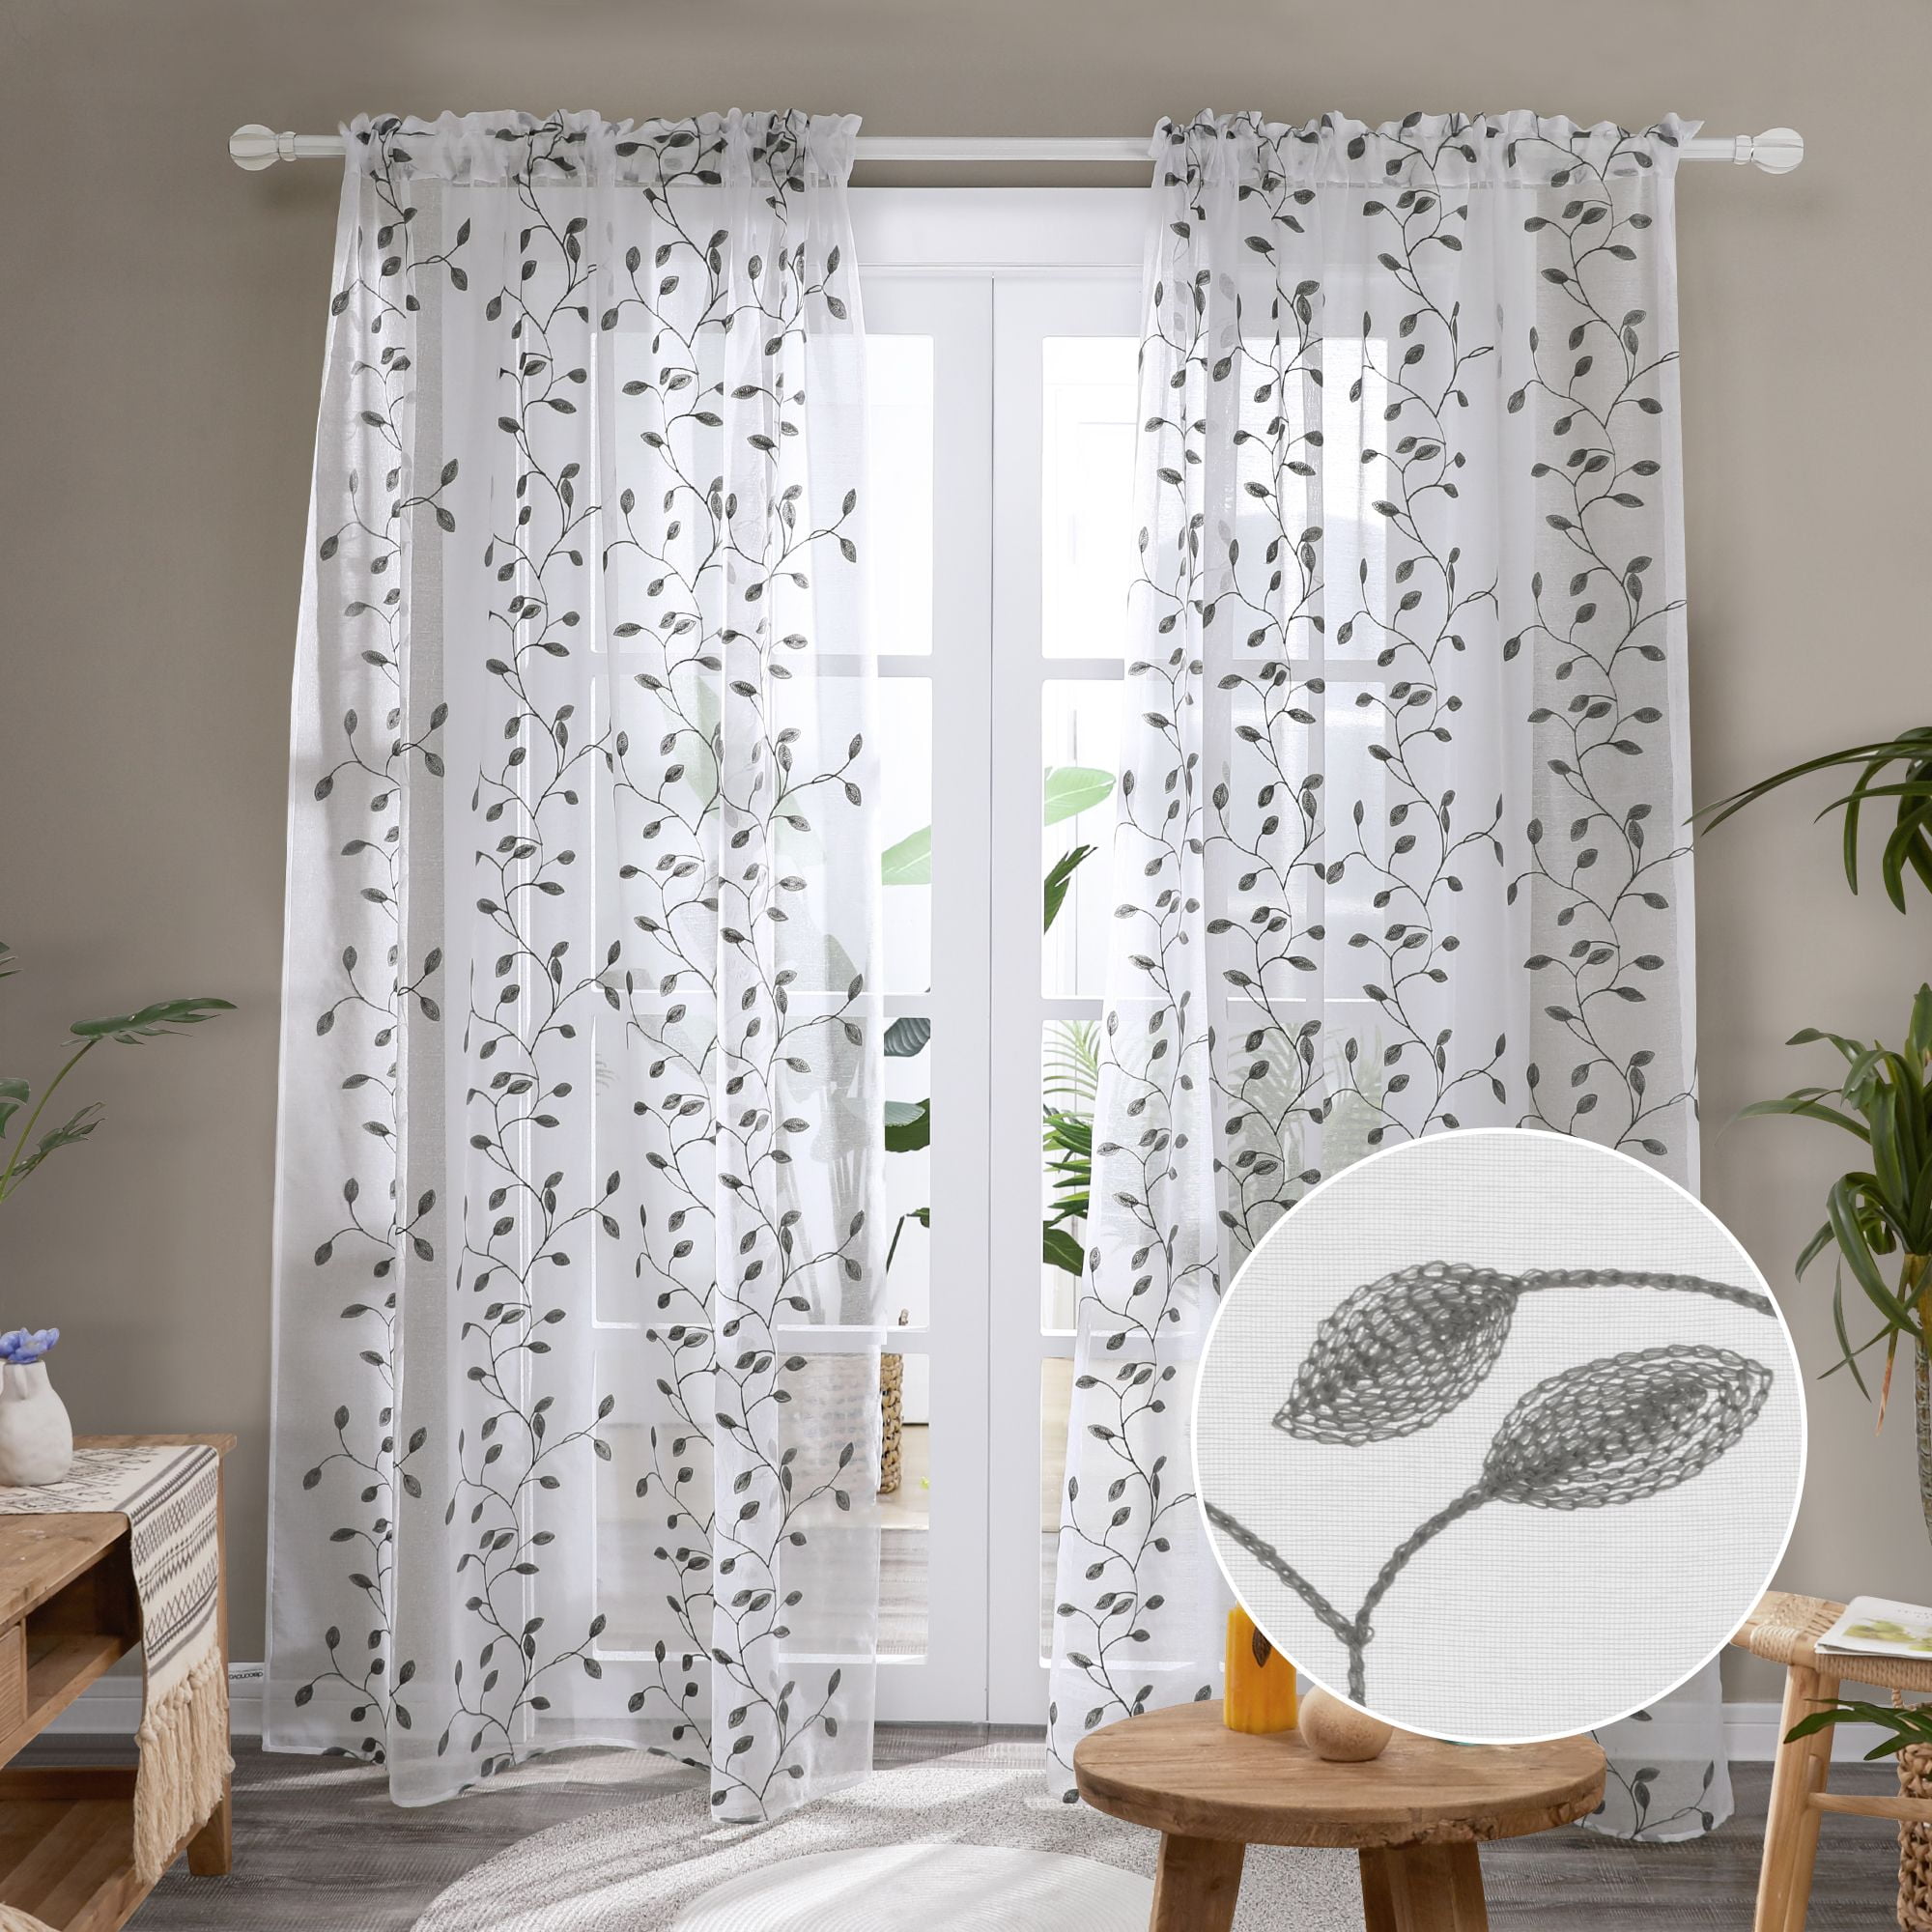 Leaf Curtain Embroidered Sheer Window Voile Panel for Bedroom & Kitchen Rod  Pocket Top (40x63 inch, 1 Piece, Green Leaf White Sheer)